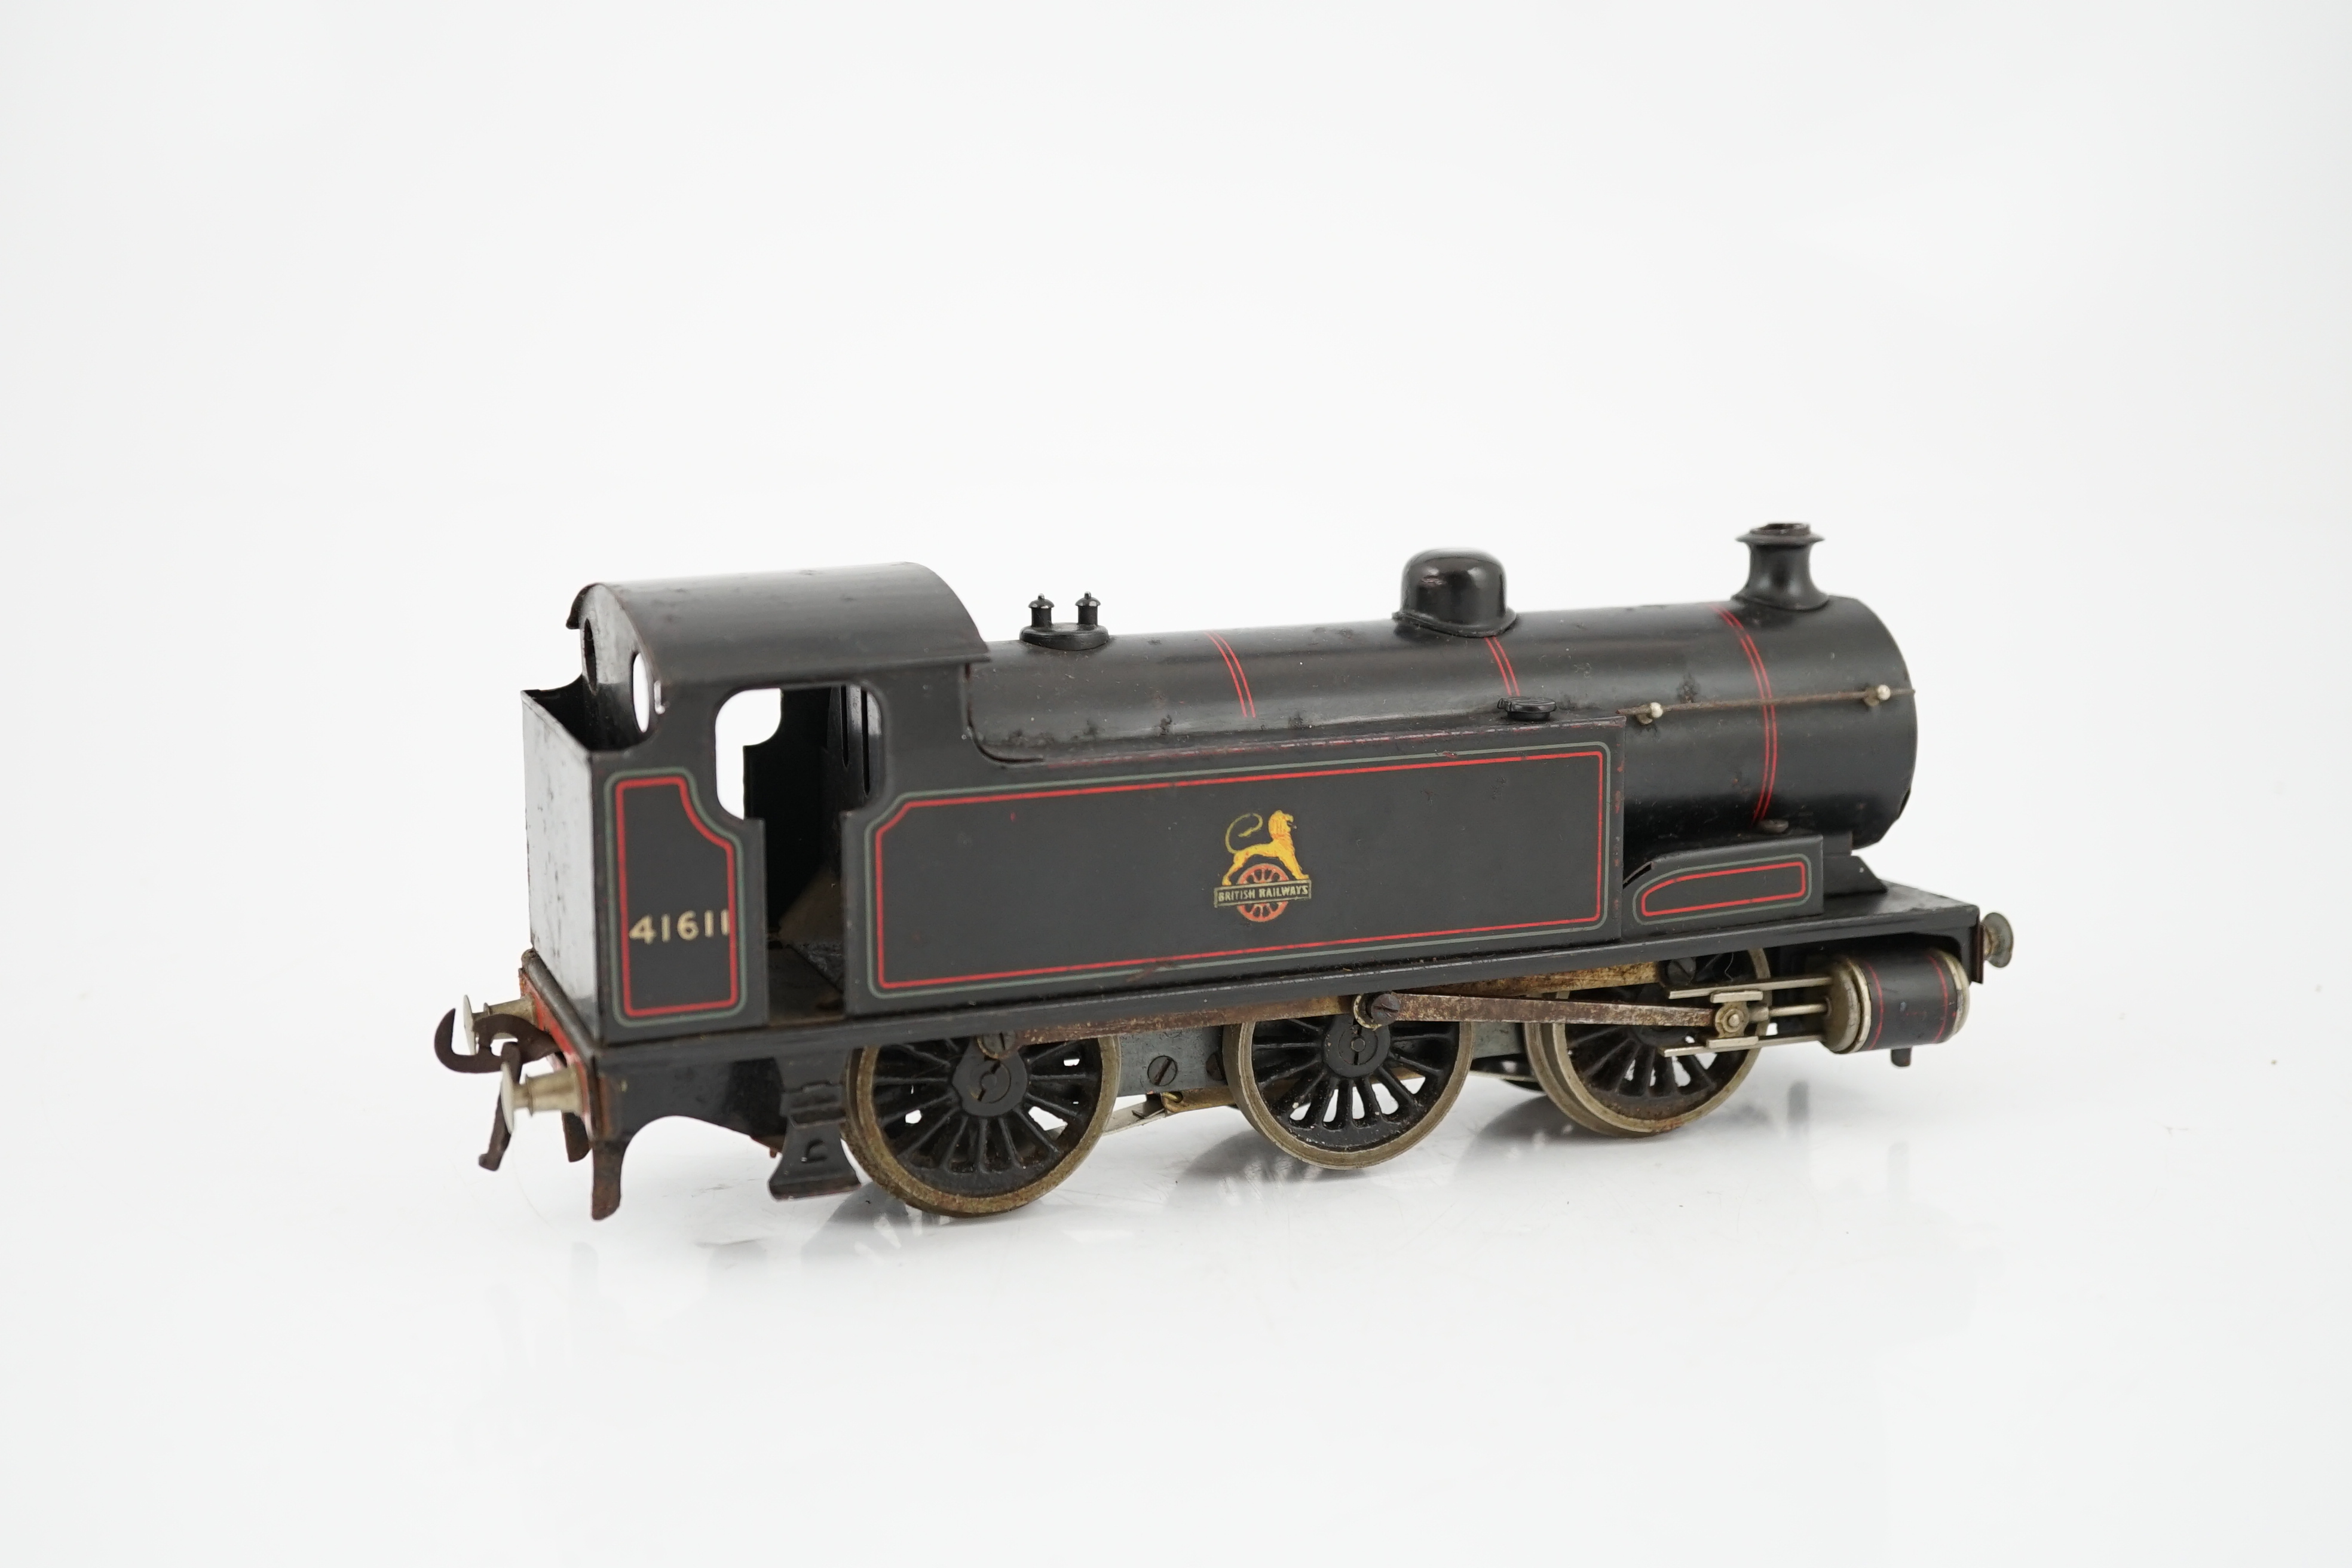 A Bassett-Lowke 0 gauge BR 0-6-0T locomotive for 3-rail running, in lined black livery, 41611 - Image 3 of 4